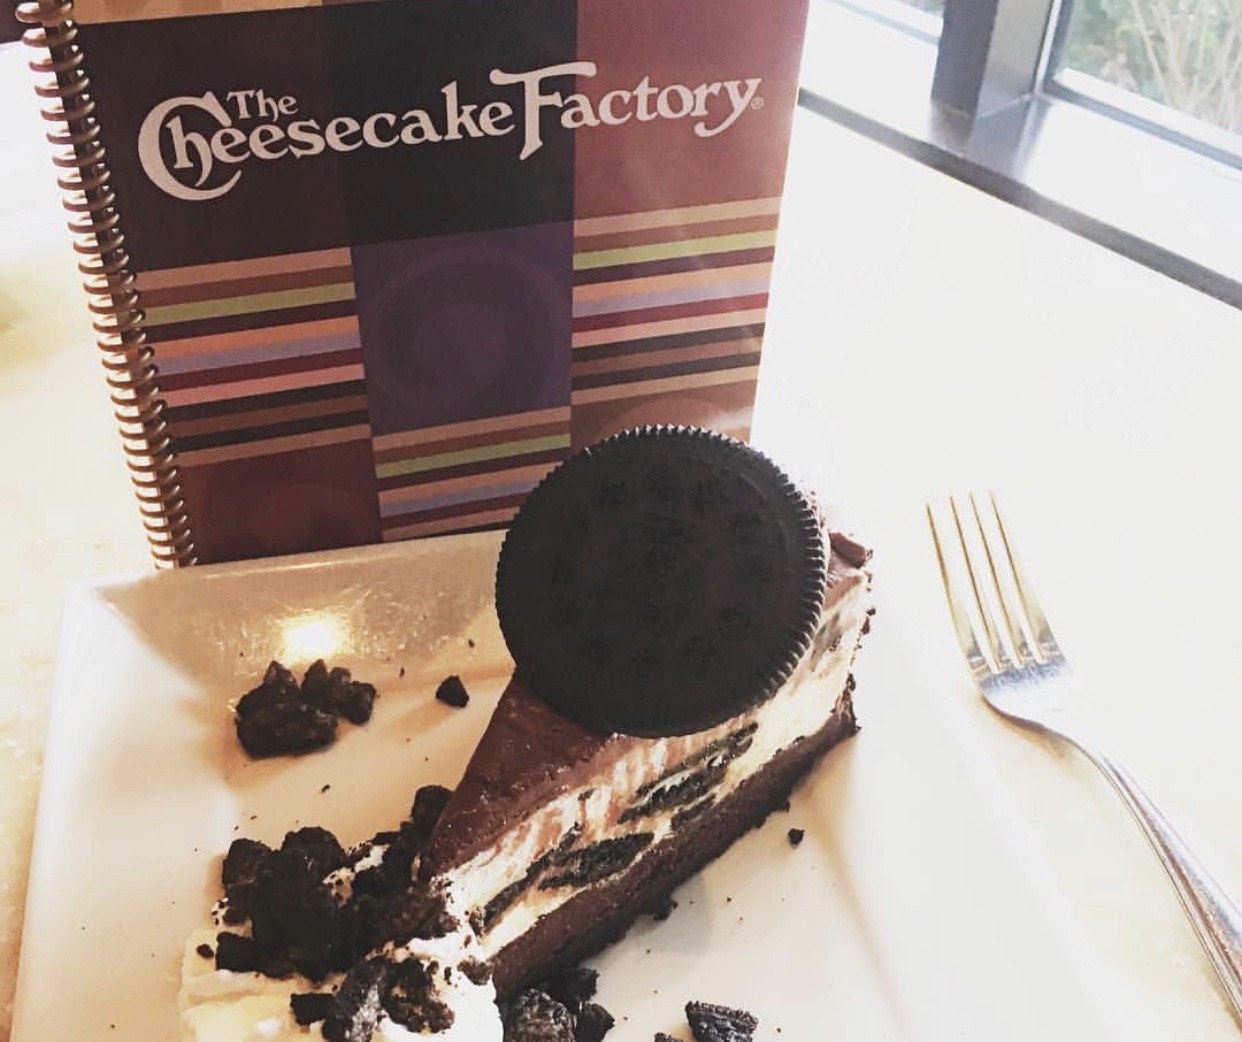 A decadent cheesecake dessert topped with an indulgent Oreo cookie, served on a plate.